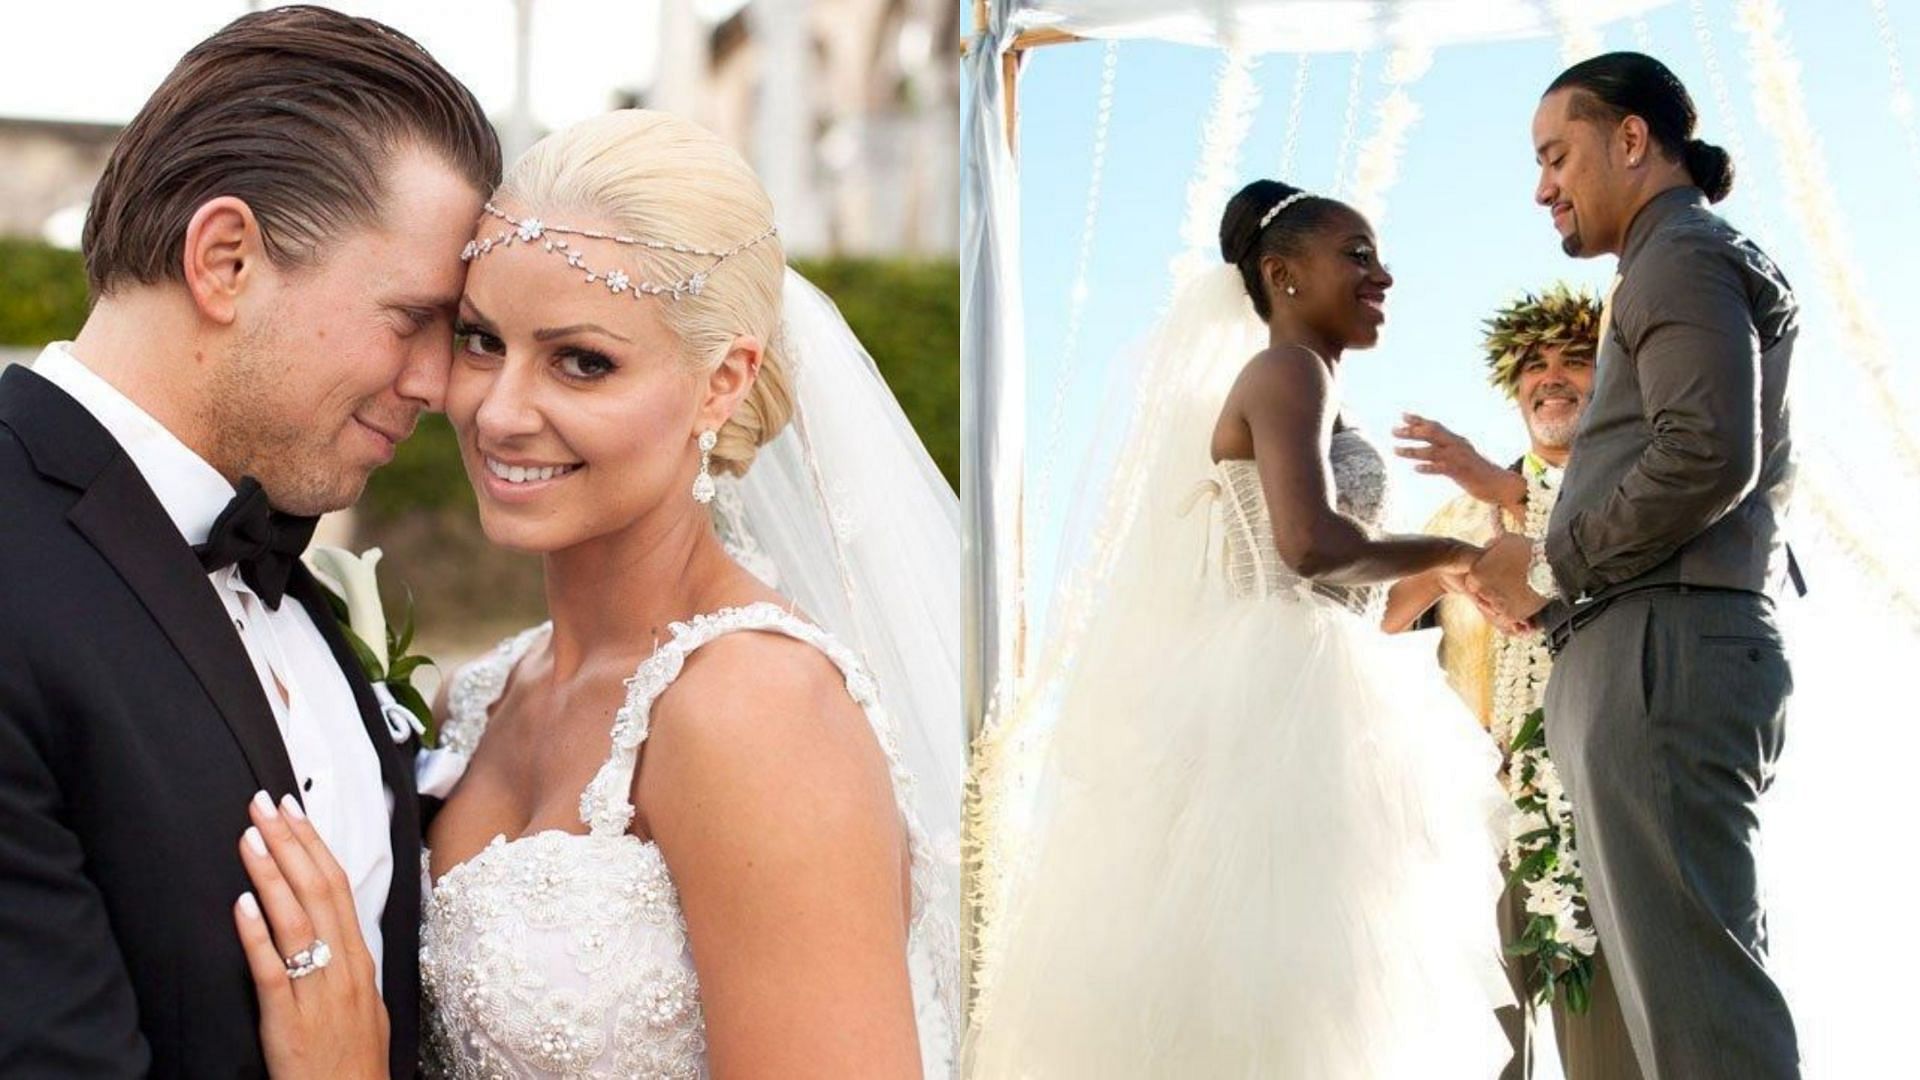 6 current WWE married couples who met in the company